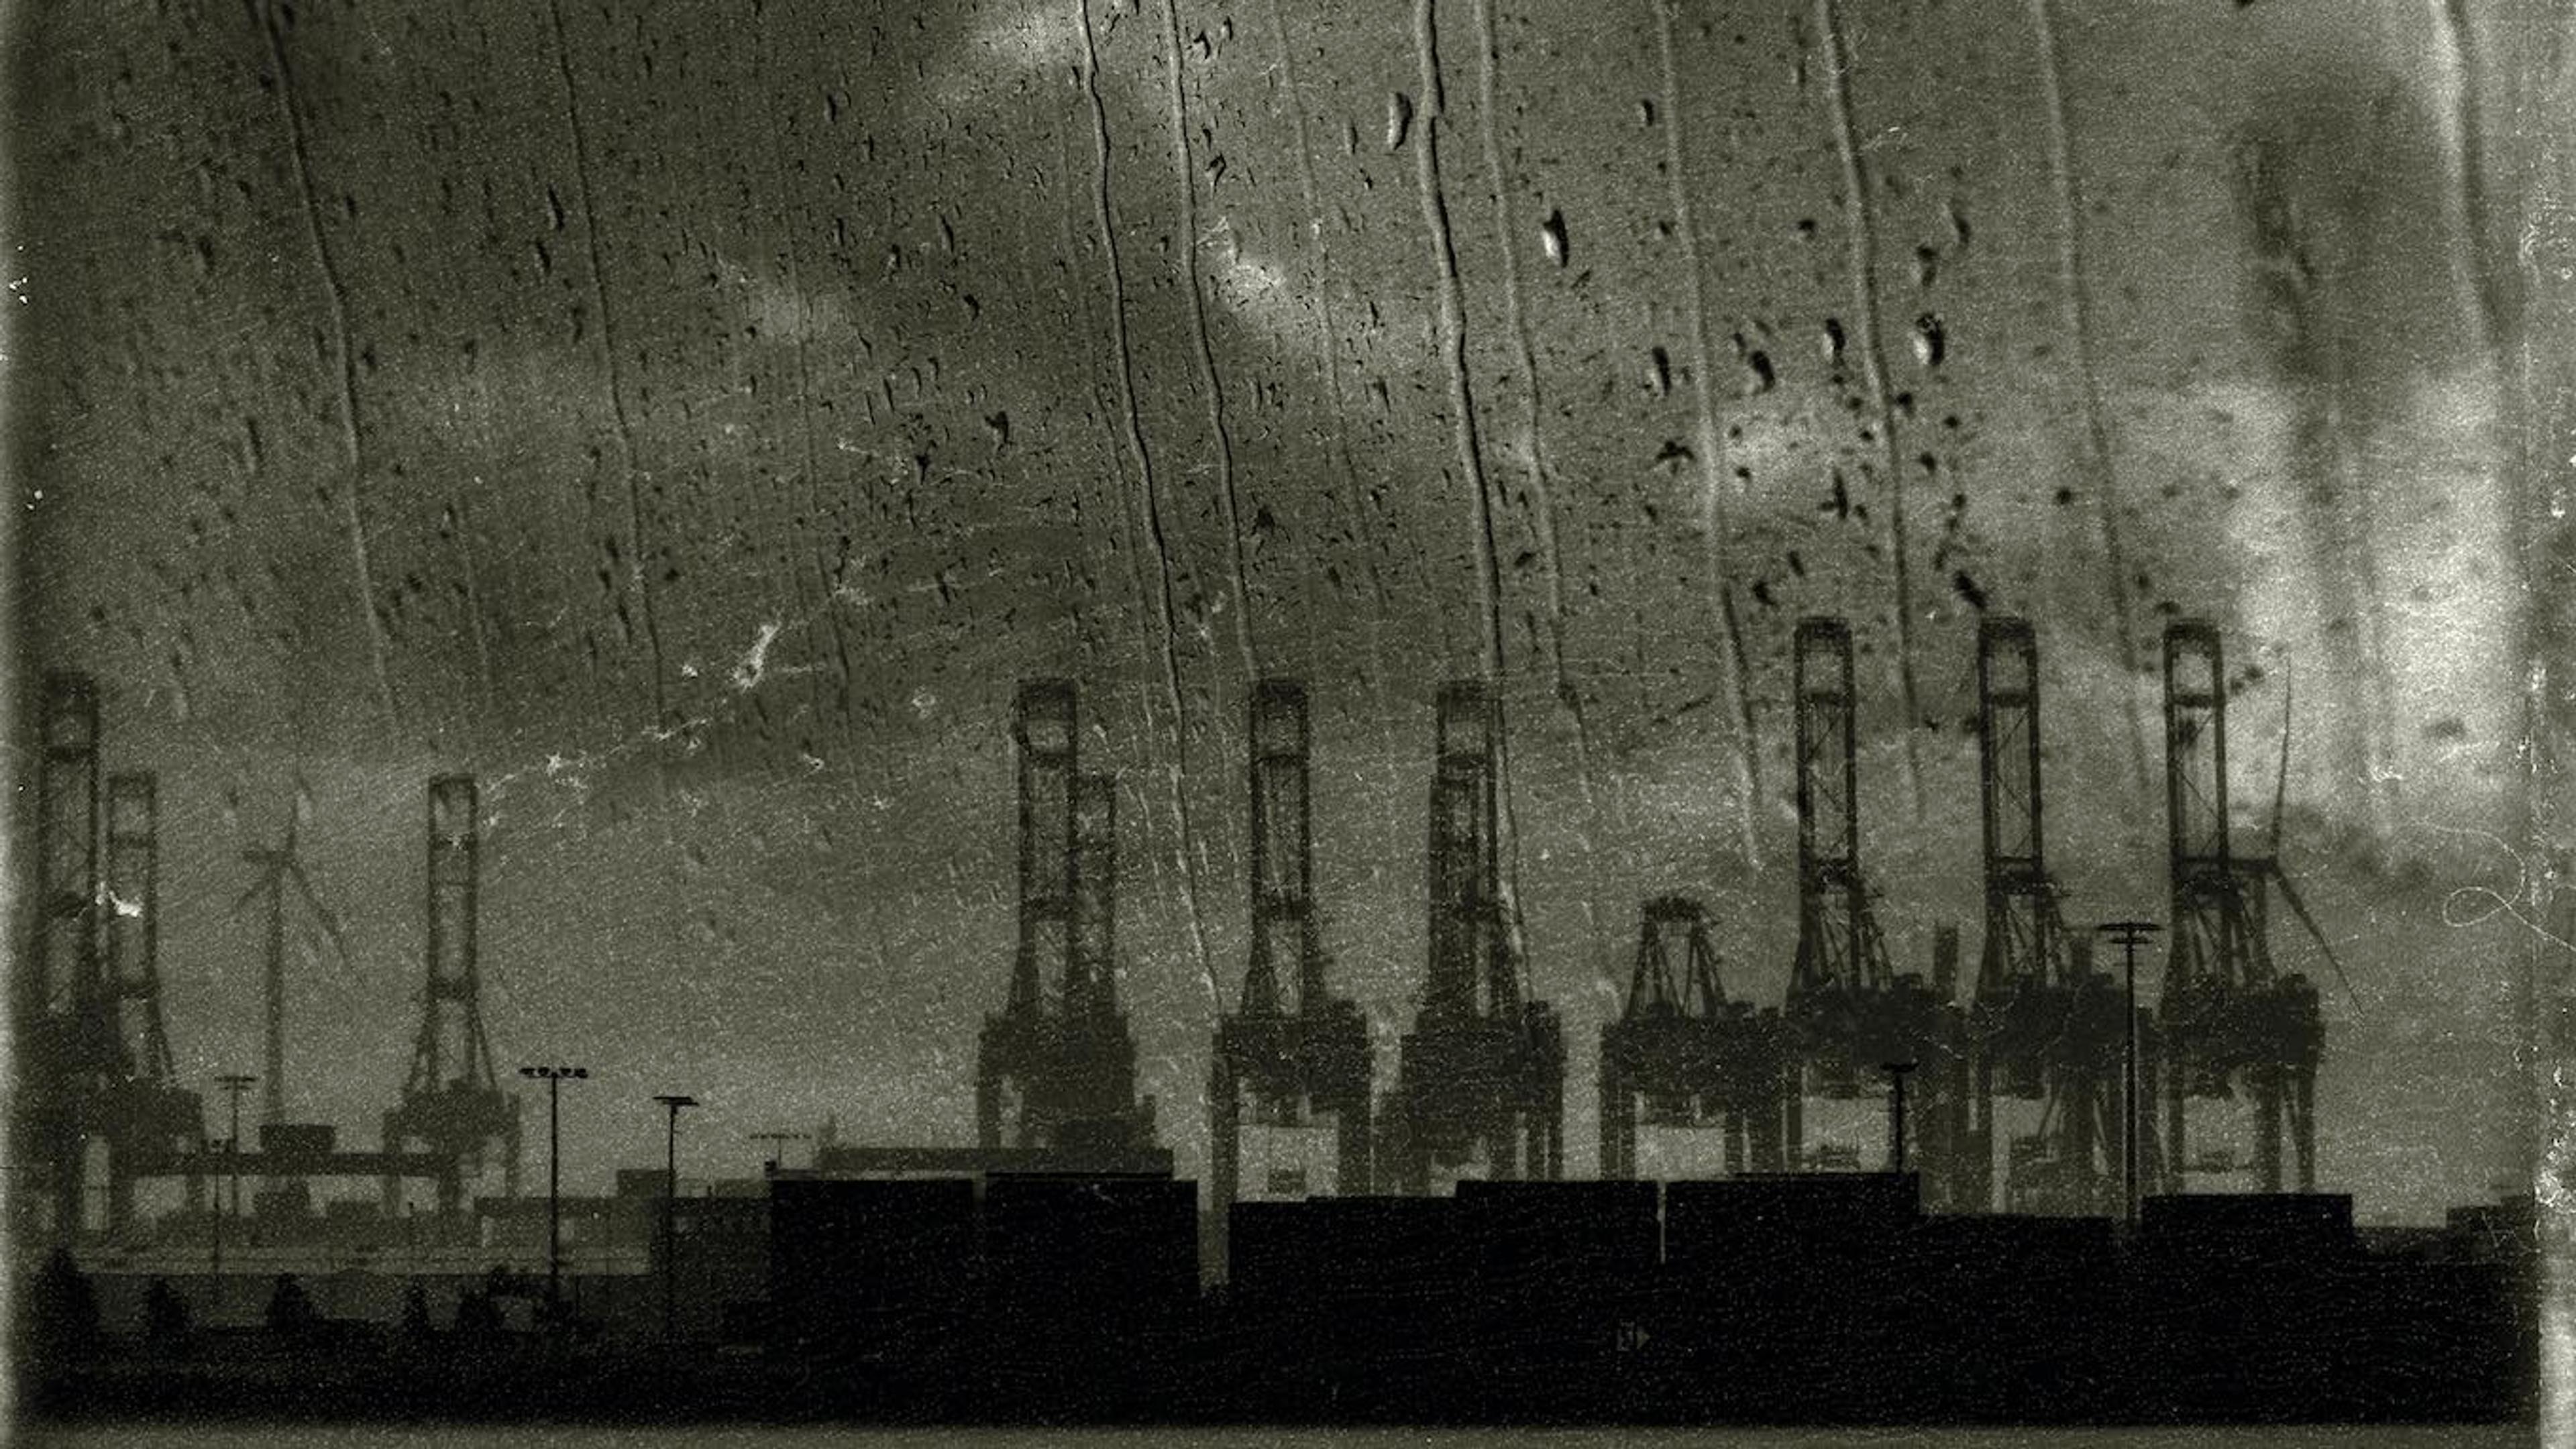 A dark photograph of an electrical plant during a storm